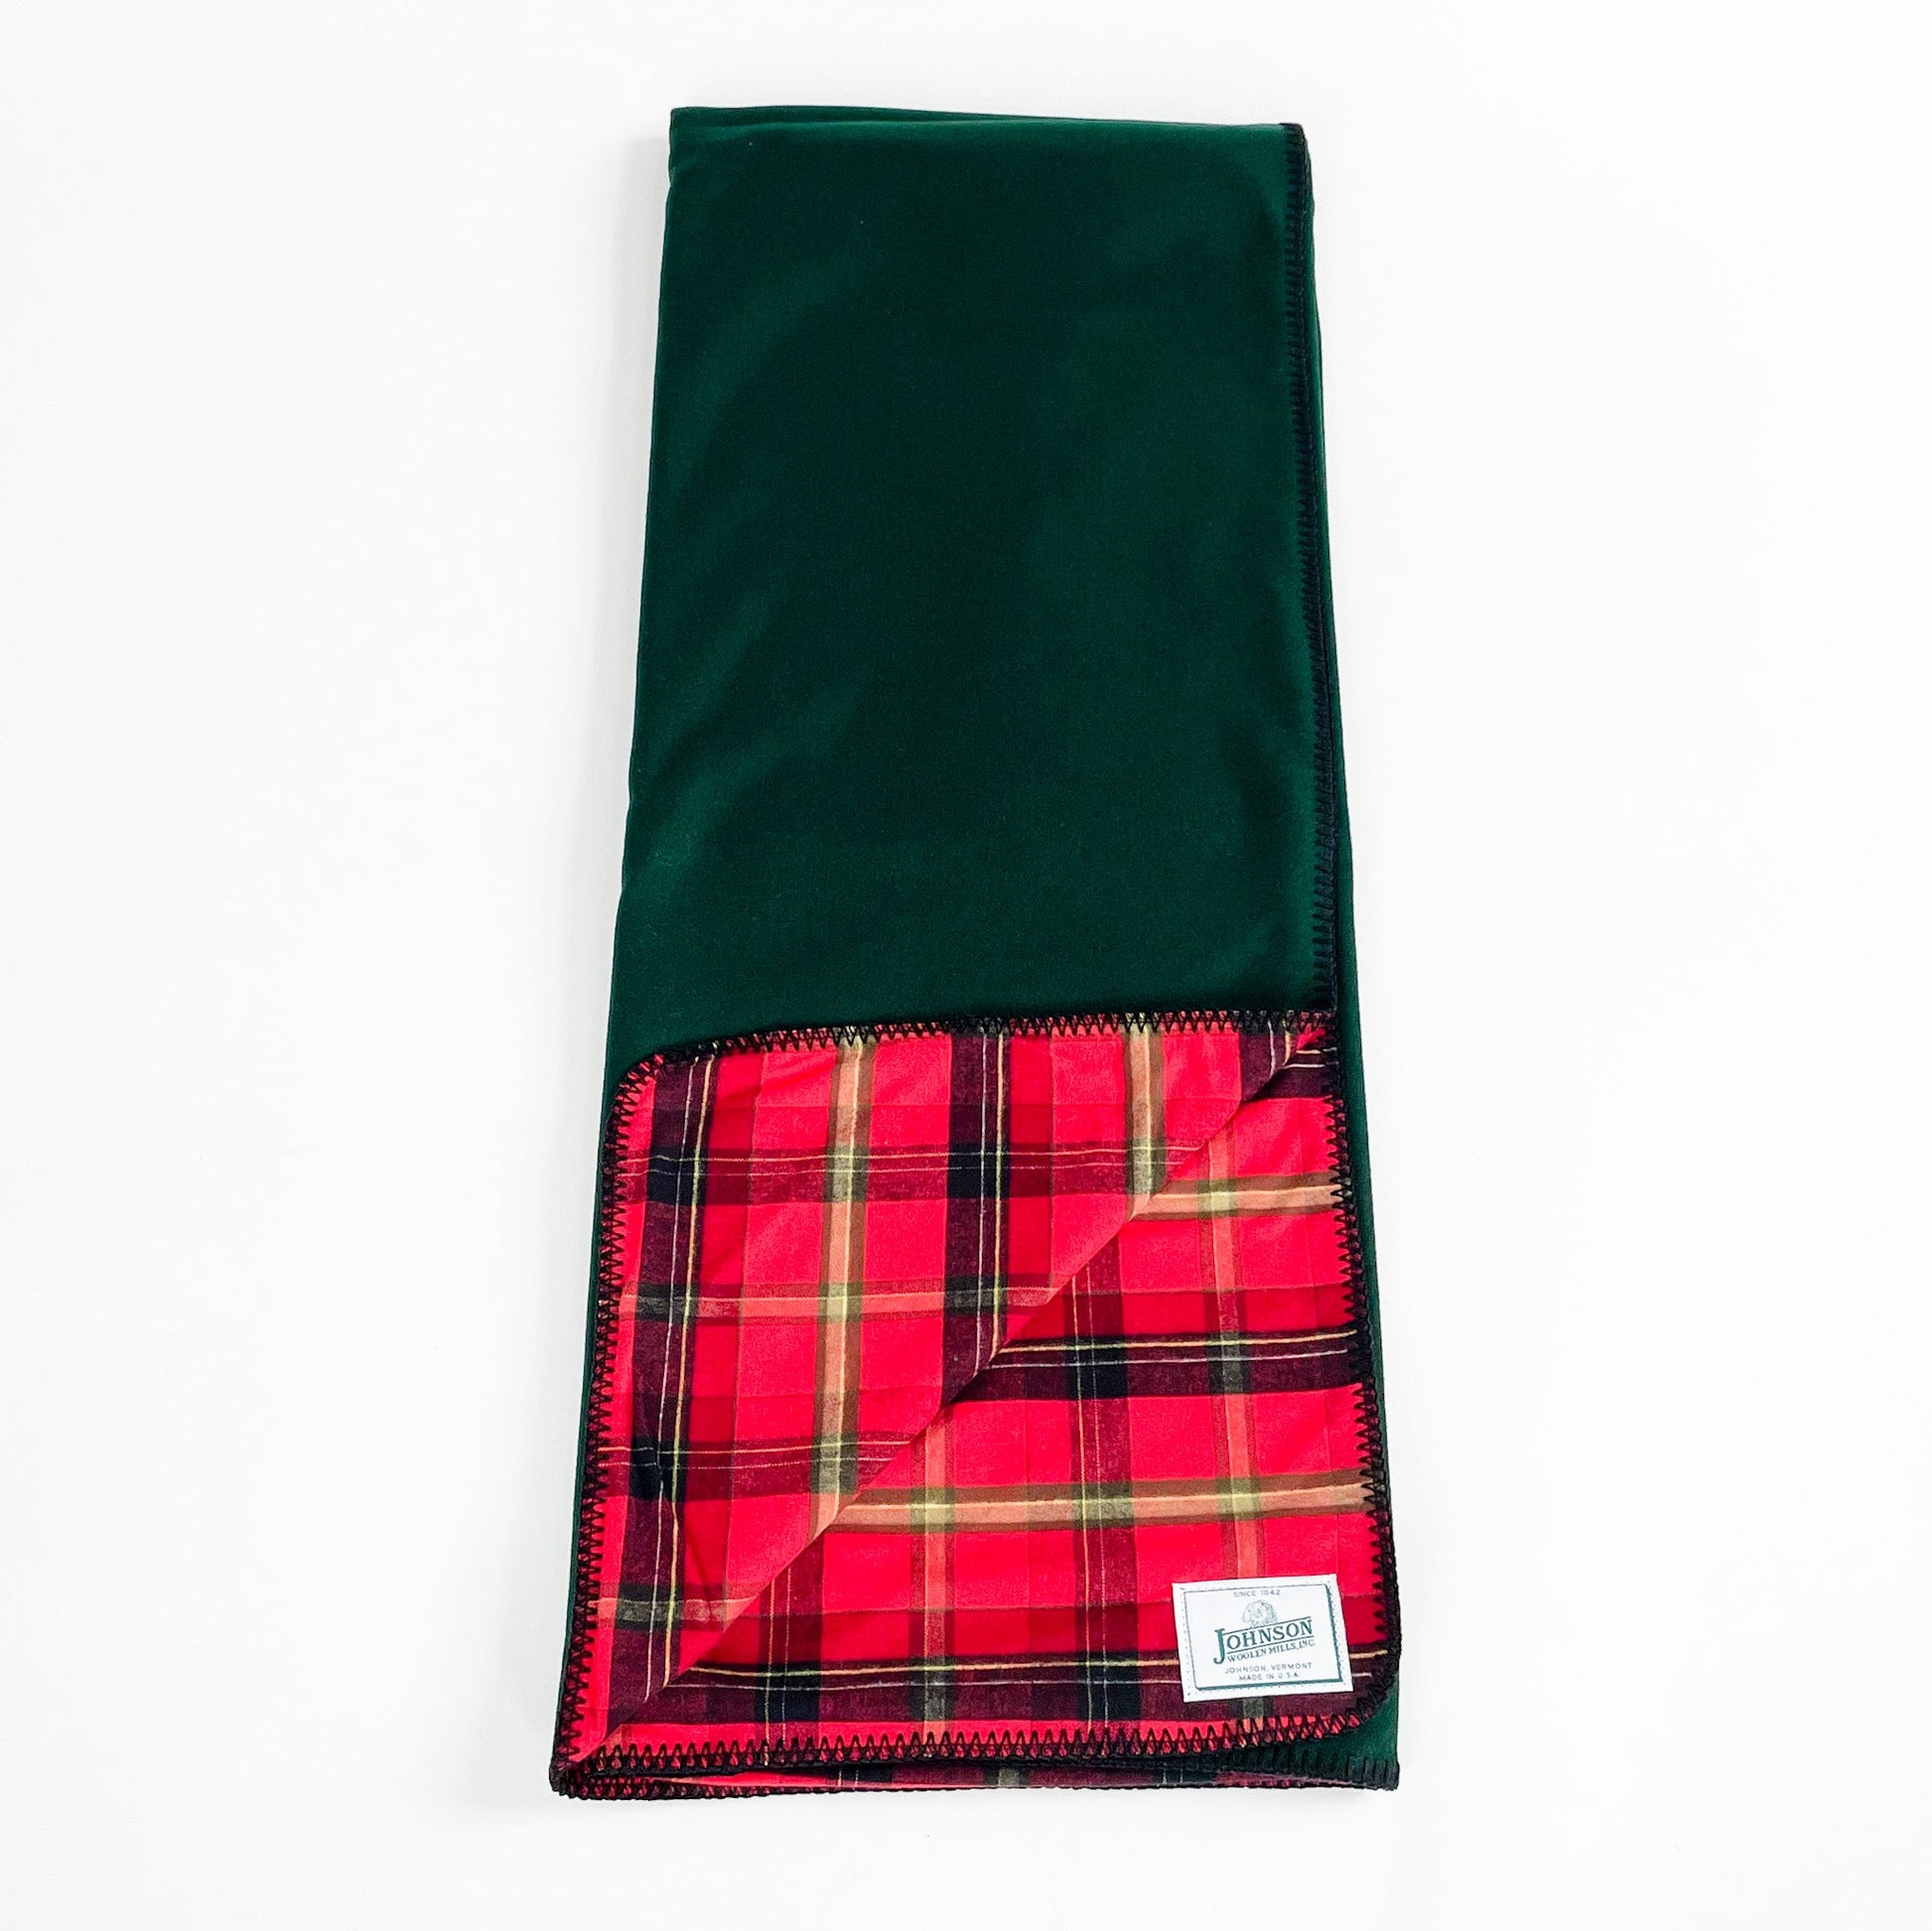 Flannel Wool Throws, spruce green wool outside, flannel red/orange/ yellow inside, front view opened